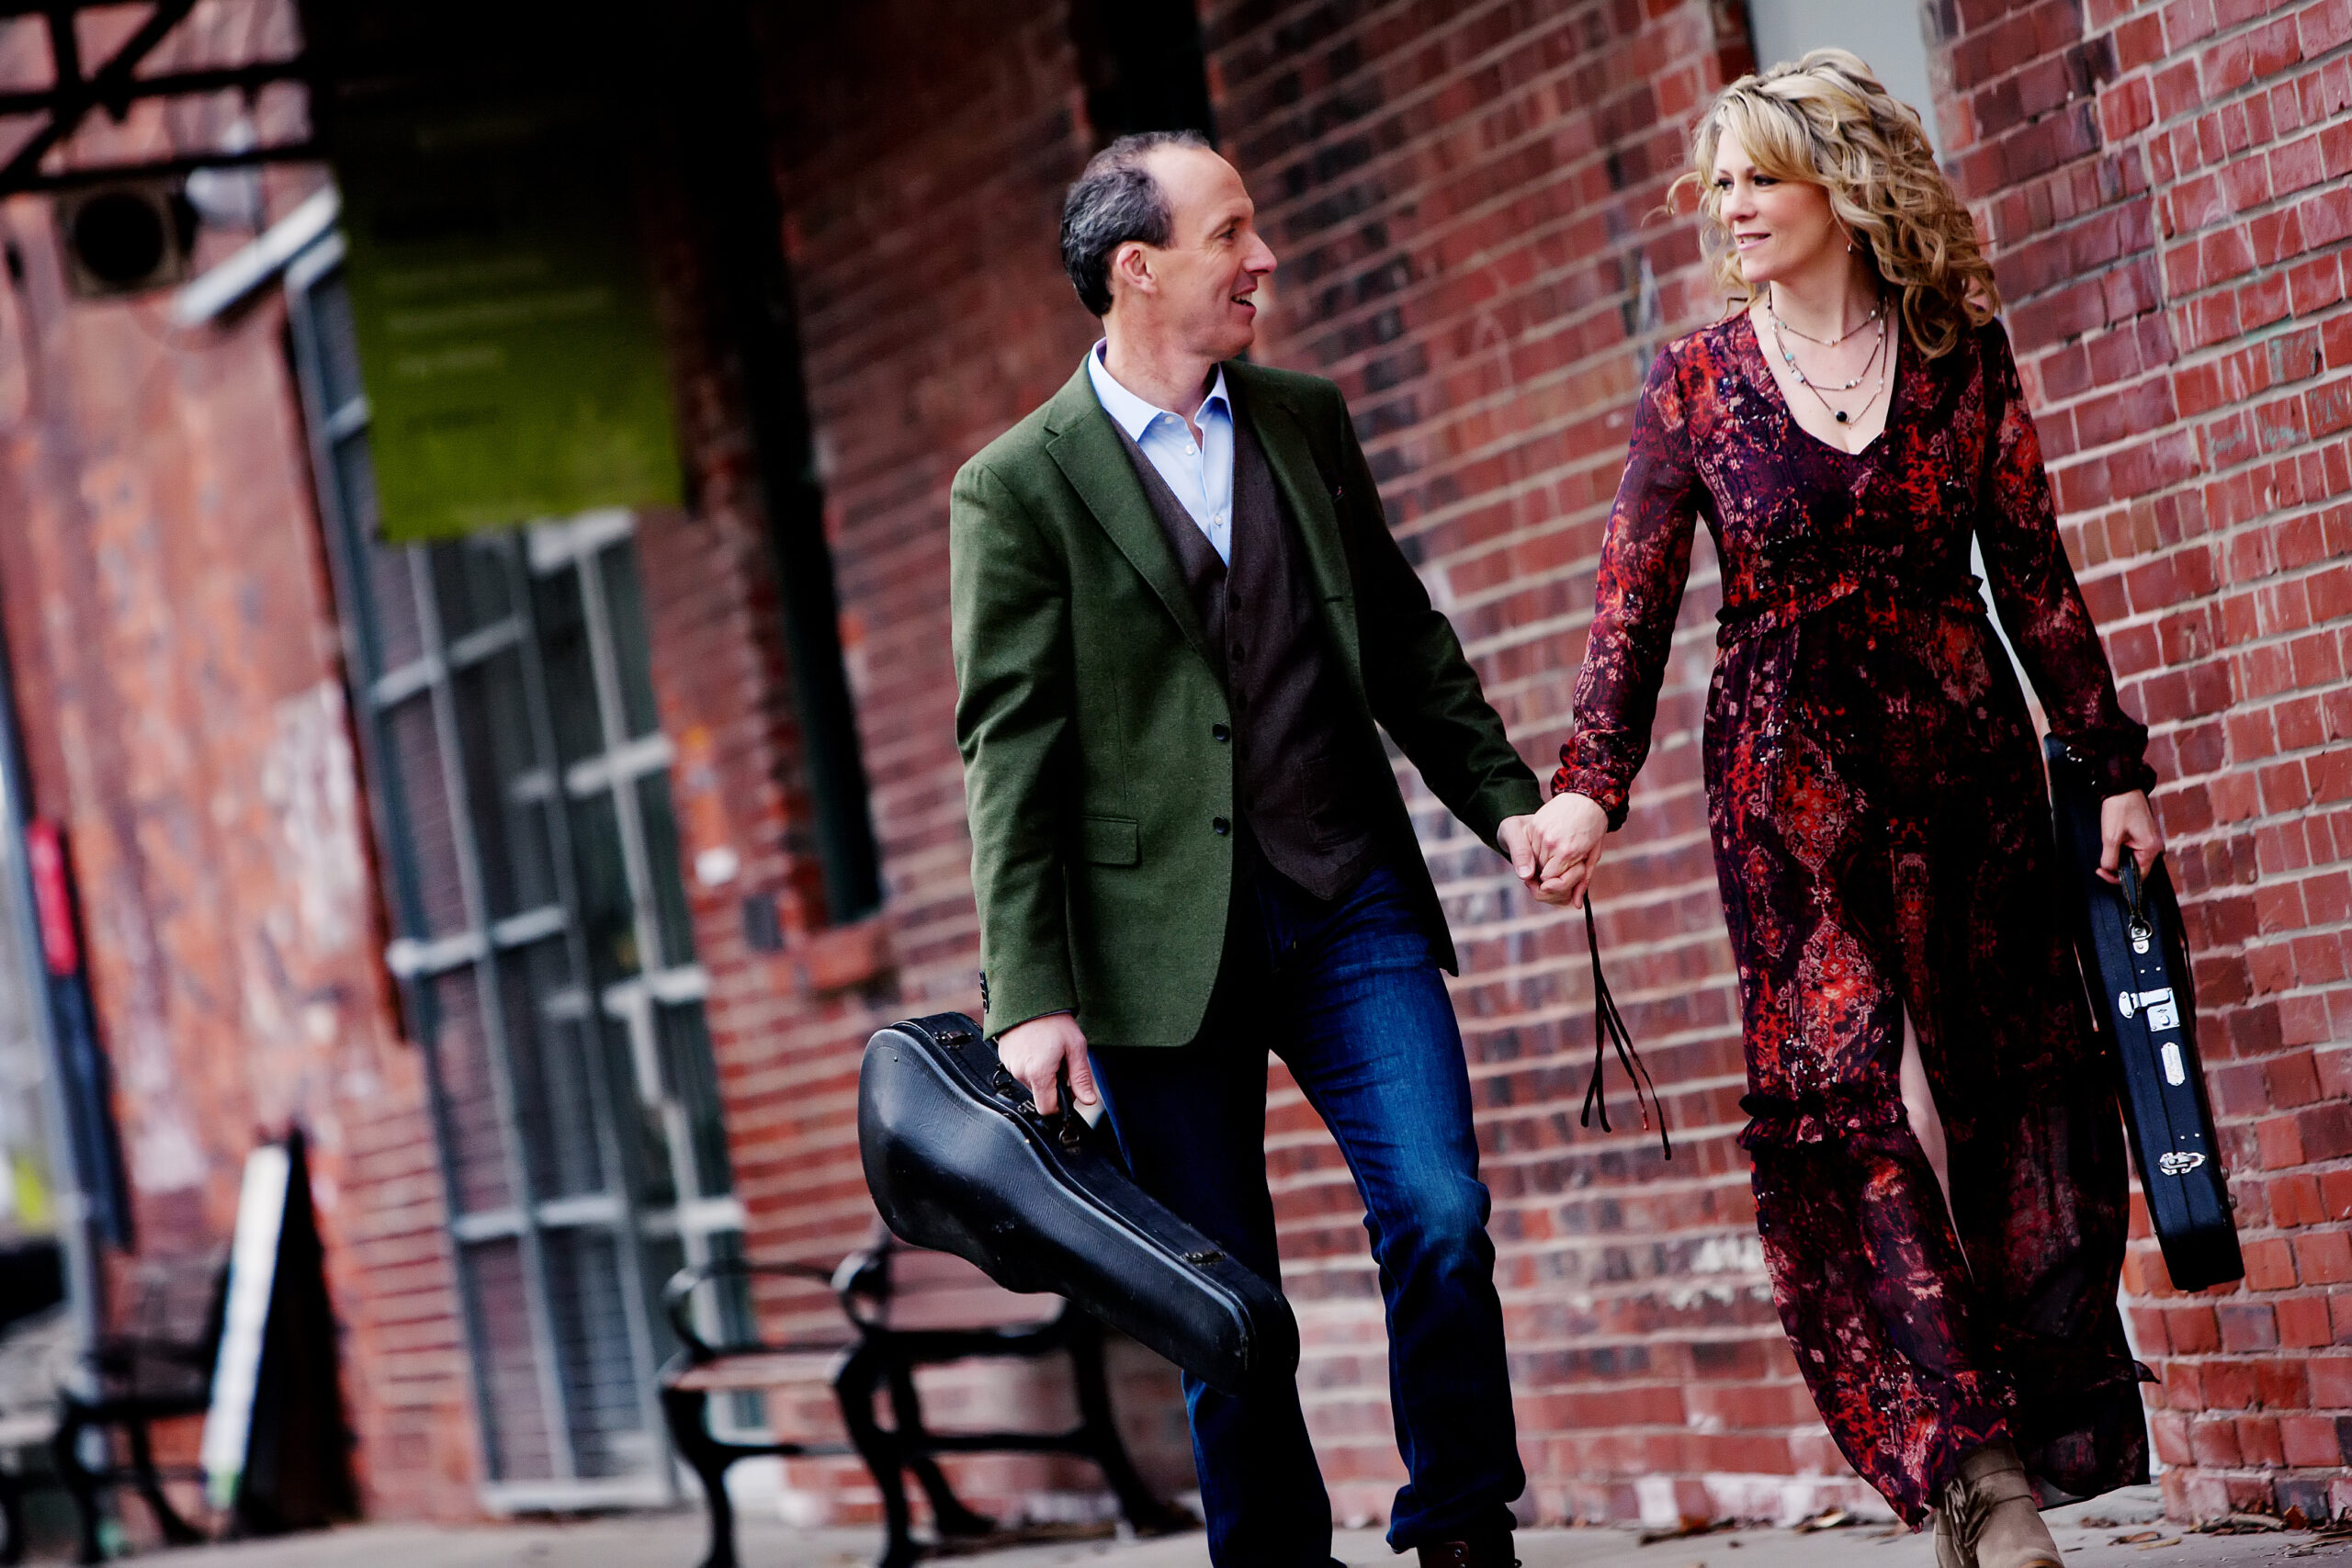 Canadian artists Natalie MacMaster & Donnell Leahy walking together, carrying instruments